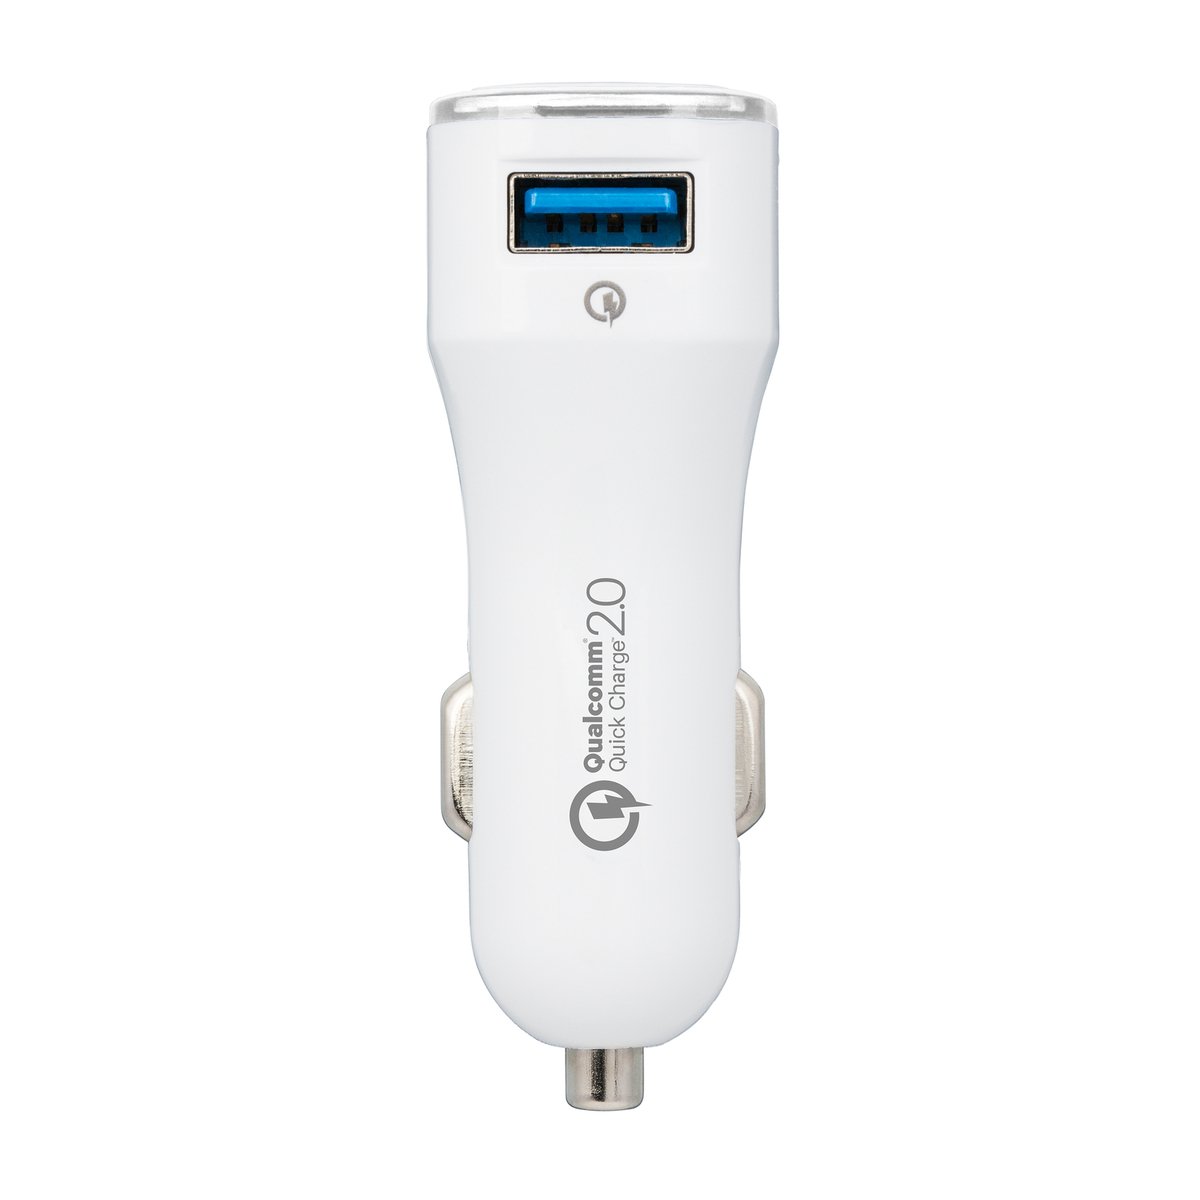 USB car charger Quick Charge 2.0® COLLECTION 500 clear